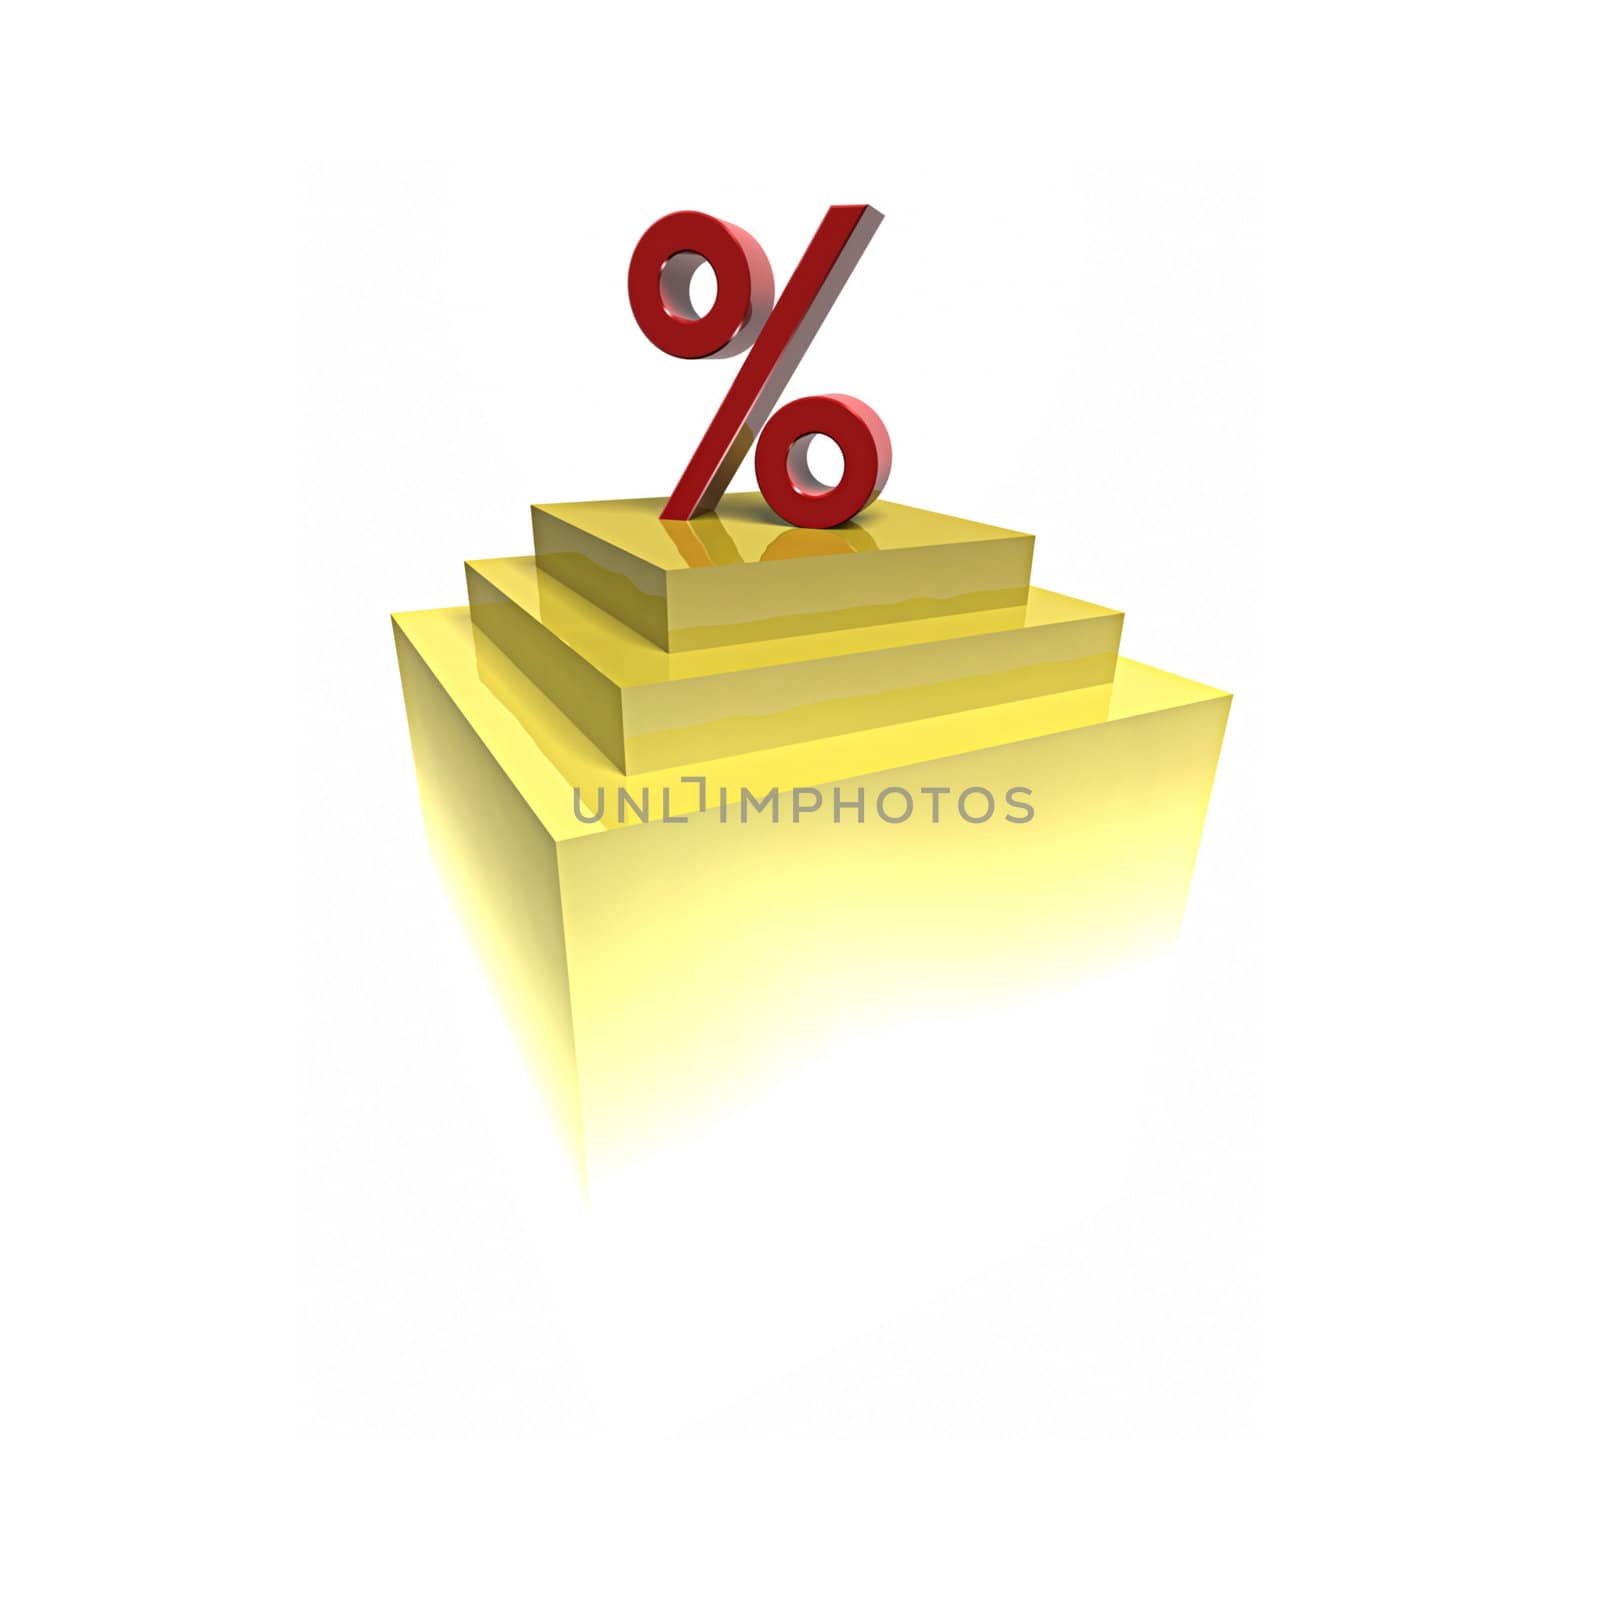 An image of a nice percent sign